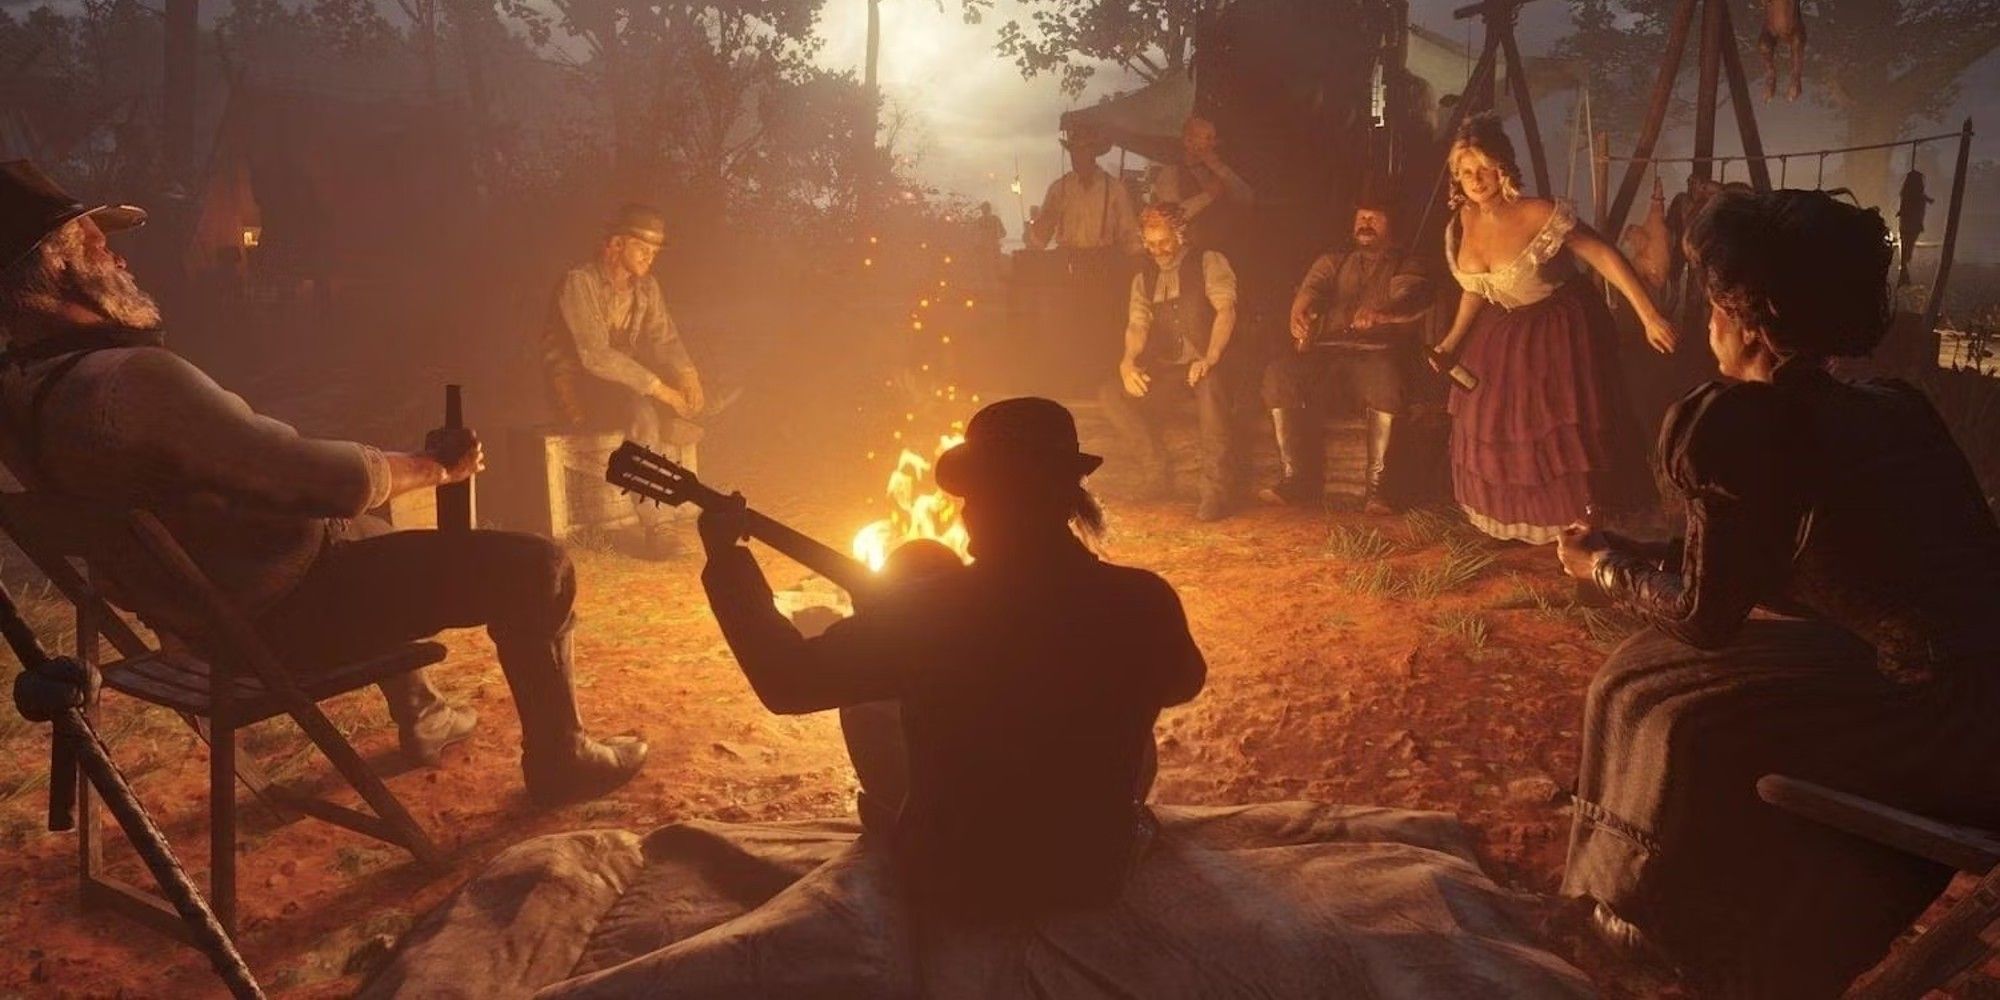 Red Dead Redemption Camp Scene at night with several characters